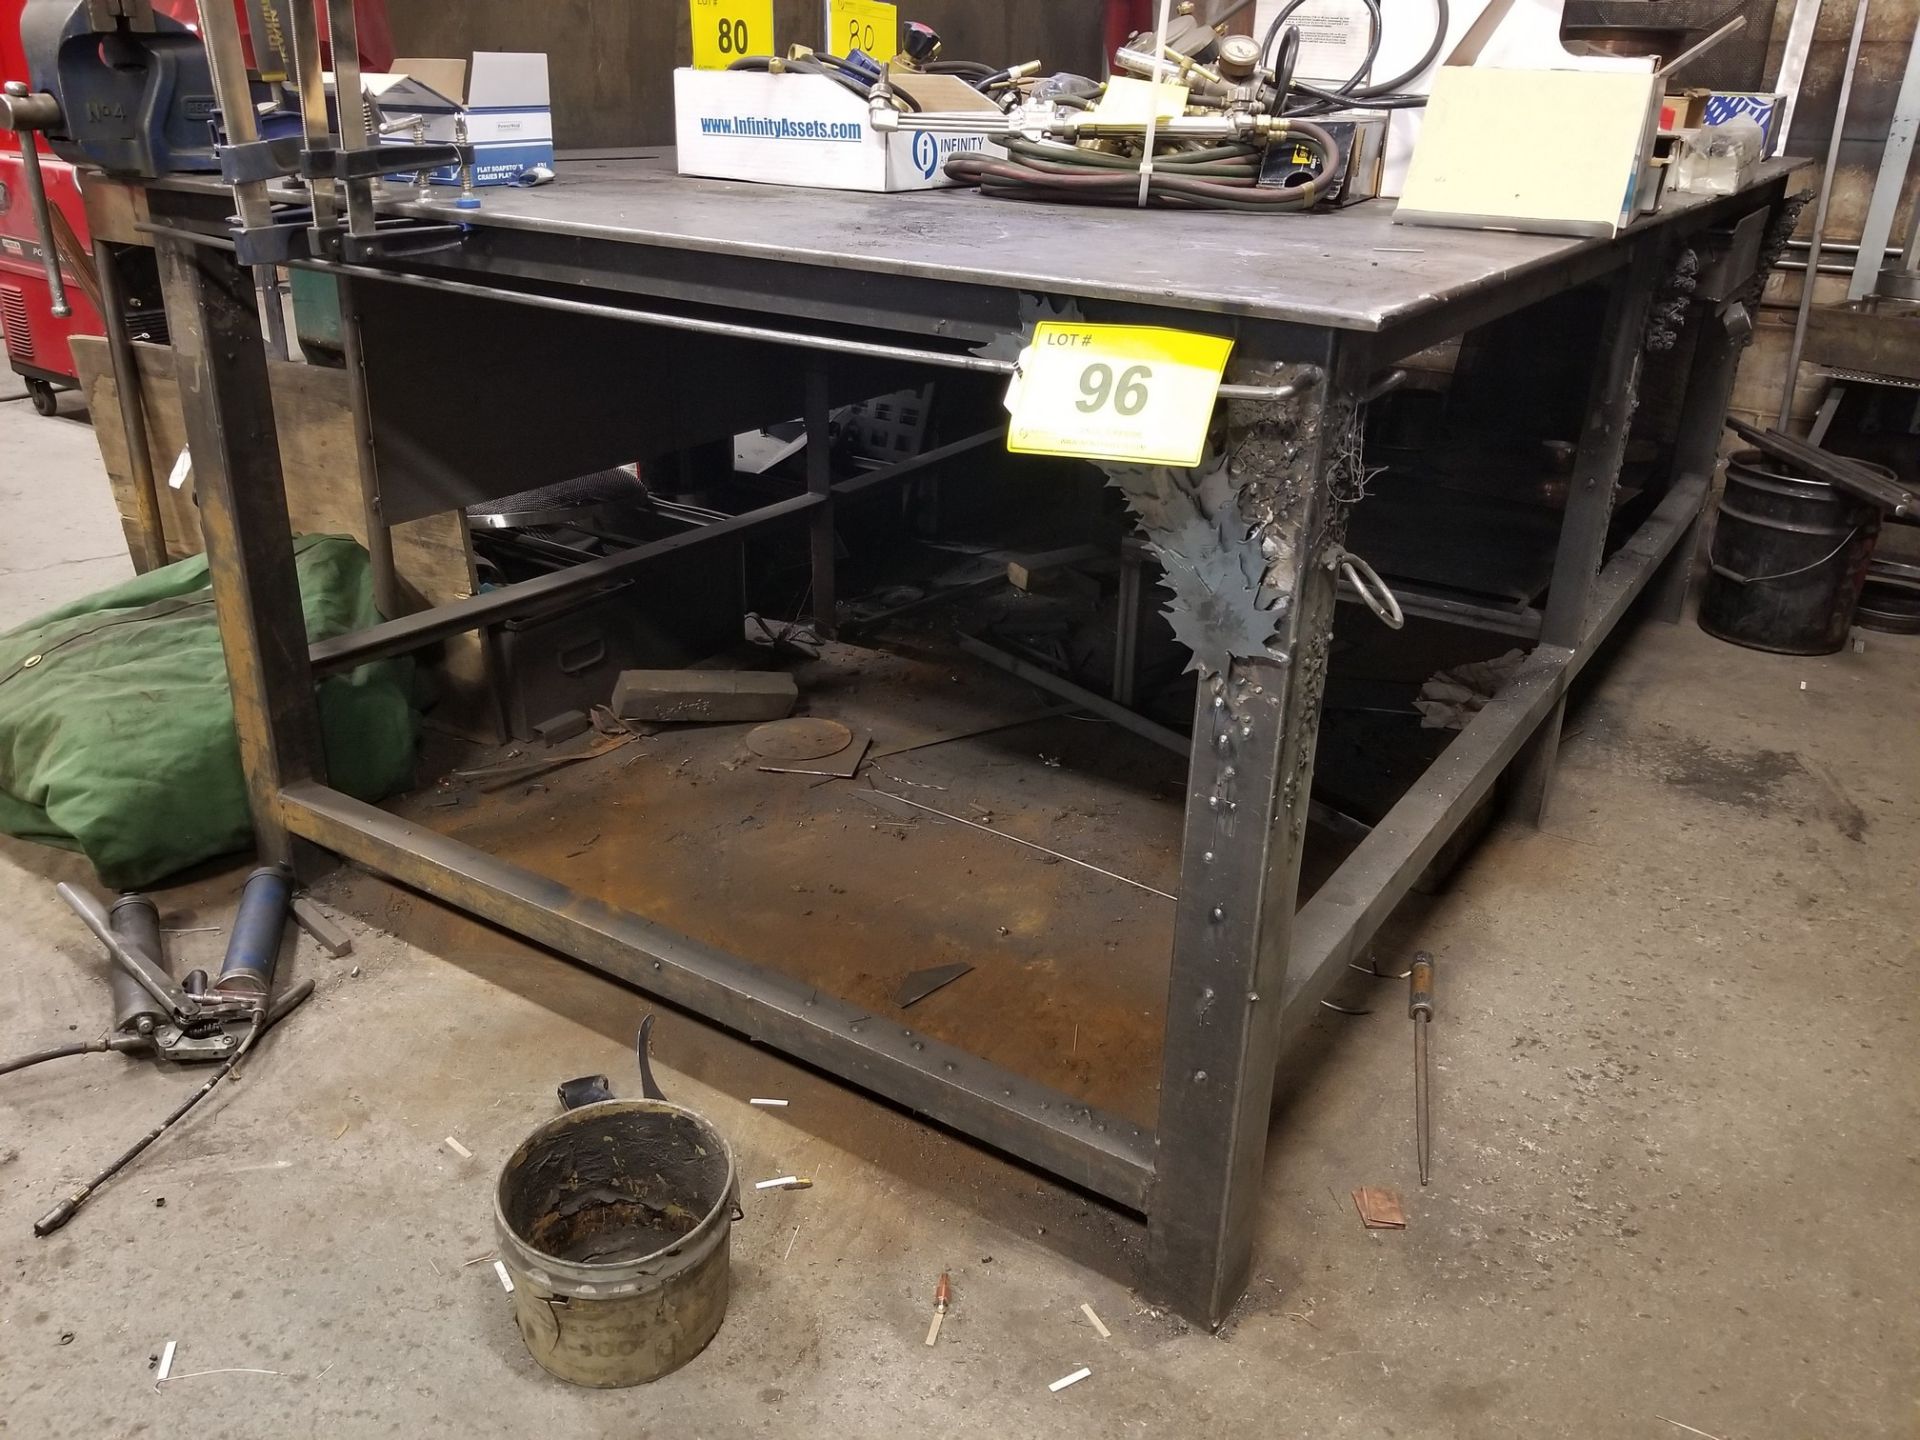 82" x 60" x 36" WELDING TABLE W/ 4-1/2" BENCH VISE (NO CONTENTS)